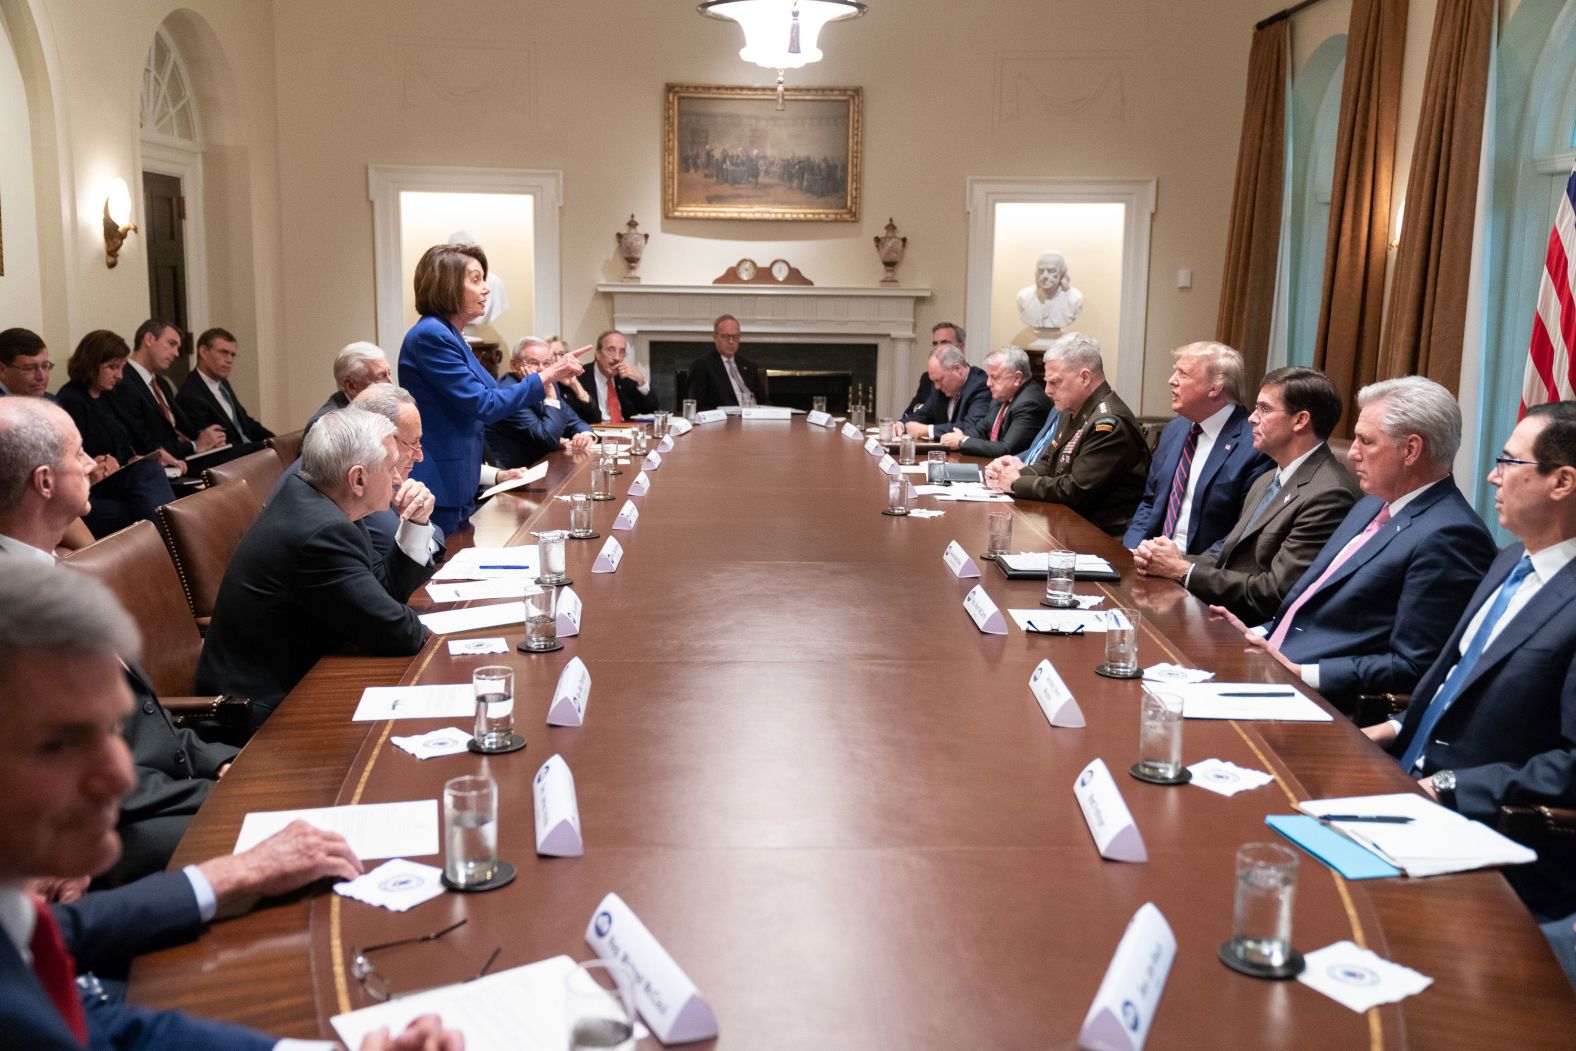 House Speaker Nancy Pelosi points at Trump during <a href="index.php?page=&url=https%3A%2F%2Fwww.cnn.com%2F2019%2F10%2F16%2Fpolitics%2Ftrump-schumer-pelosi-meltdown%2Findex.html" target="_blank">a contentious White House meeting</a> in October 2019. Democratic leaders were there for a meeting about Syria, and Senate Minority Leader Chuck Schumer said they walked out when Trump went on a diatribe and "started calling Speaker Pelosi a third-rate politician." Pelosi said, "What we witnessed on the part of the president was a meltdown." Trump later tweeted this photo, taken by White House photographer Shealah Craighead, with the caption "Nervous Nancy's unhinged meltdown!" Pelosi then <a href="index.php?page=&url=https%3A%2F%2Fwww.cnn.com%2F2019%2F10%2F16%2Fpolitics%2Fnancy-pelosi-trump-twitter-cover-photo%2Findex.html" target="_blank">made it the cover photo</a> for her own Twitter account.